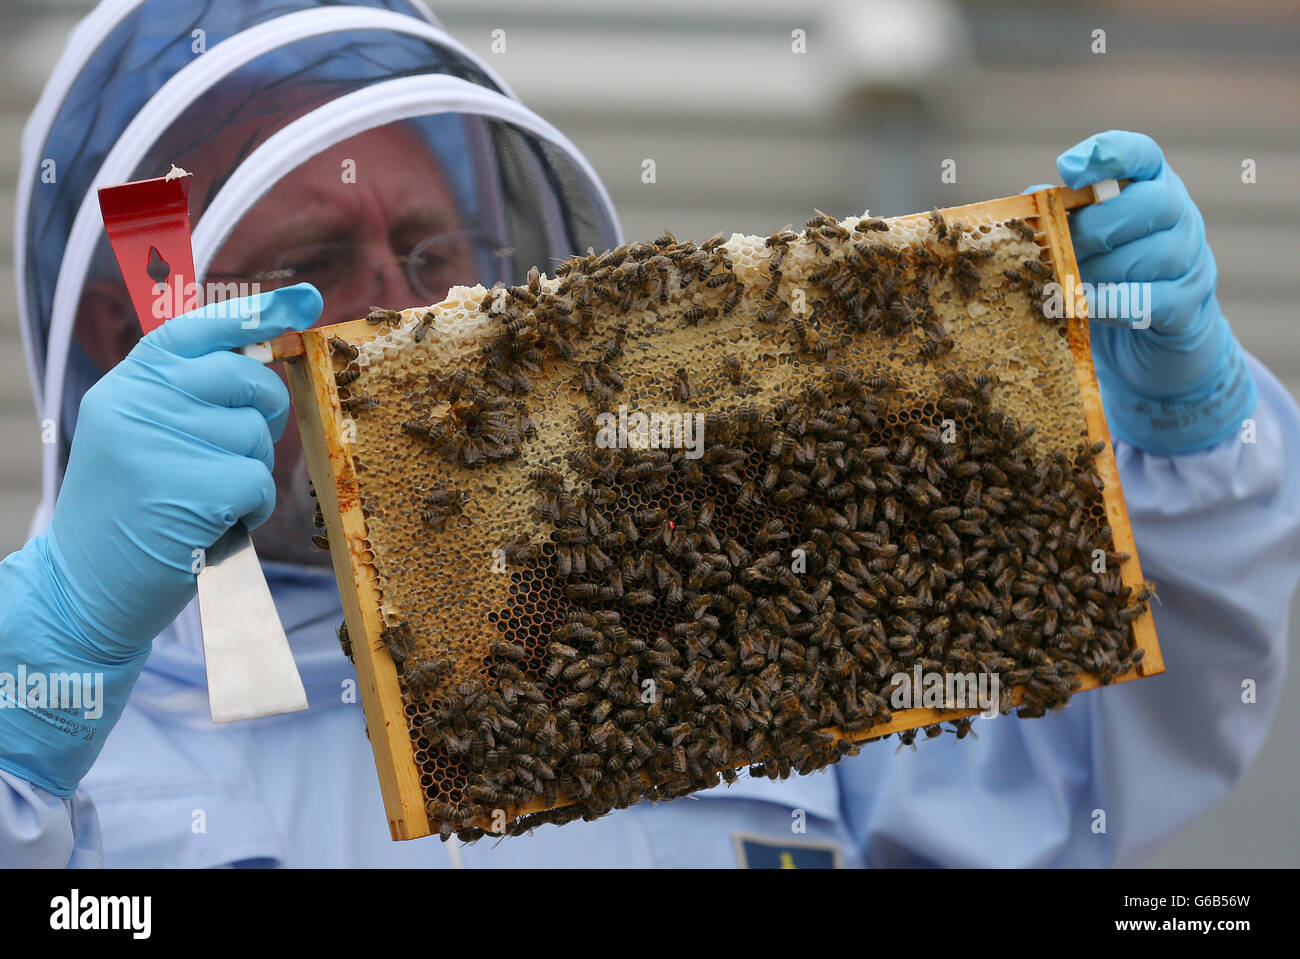 Bee stock. A bee keeper holds a tray of bees during a photocall at The Printworks in Manchester city centre. Stock Photo